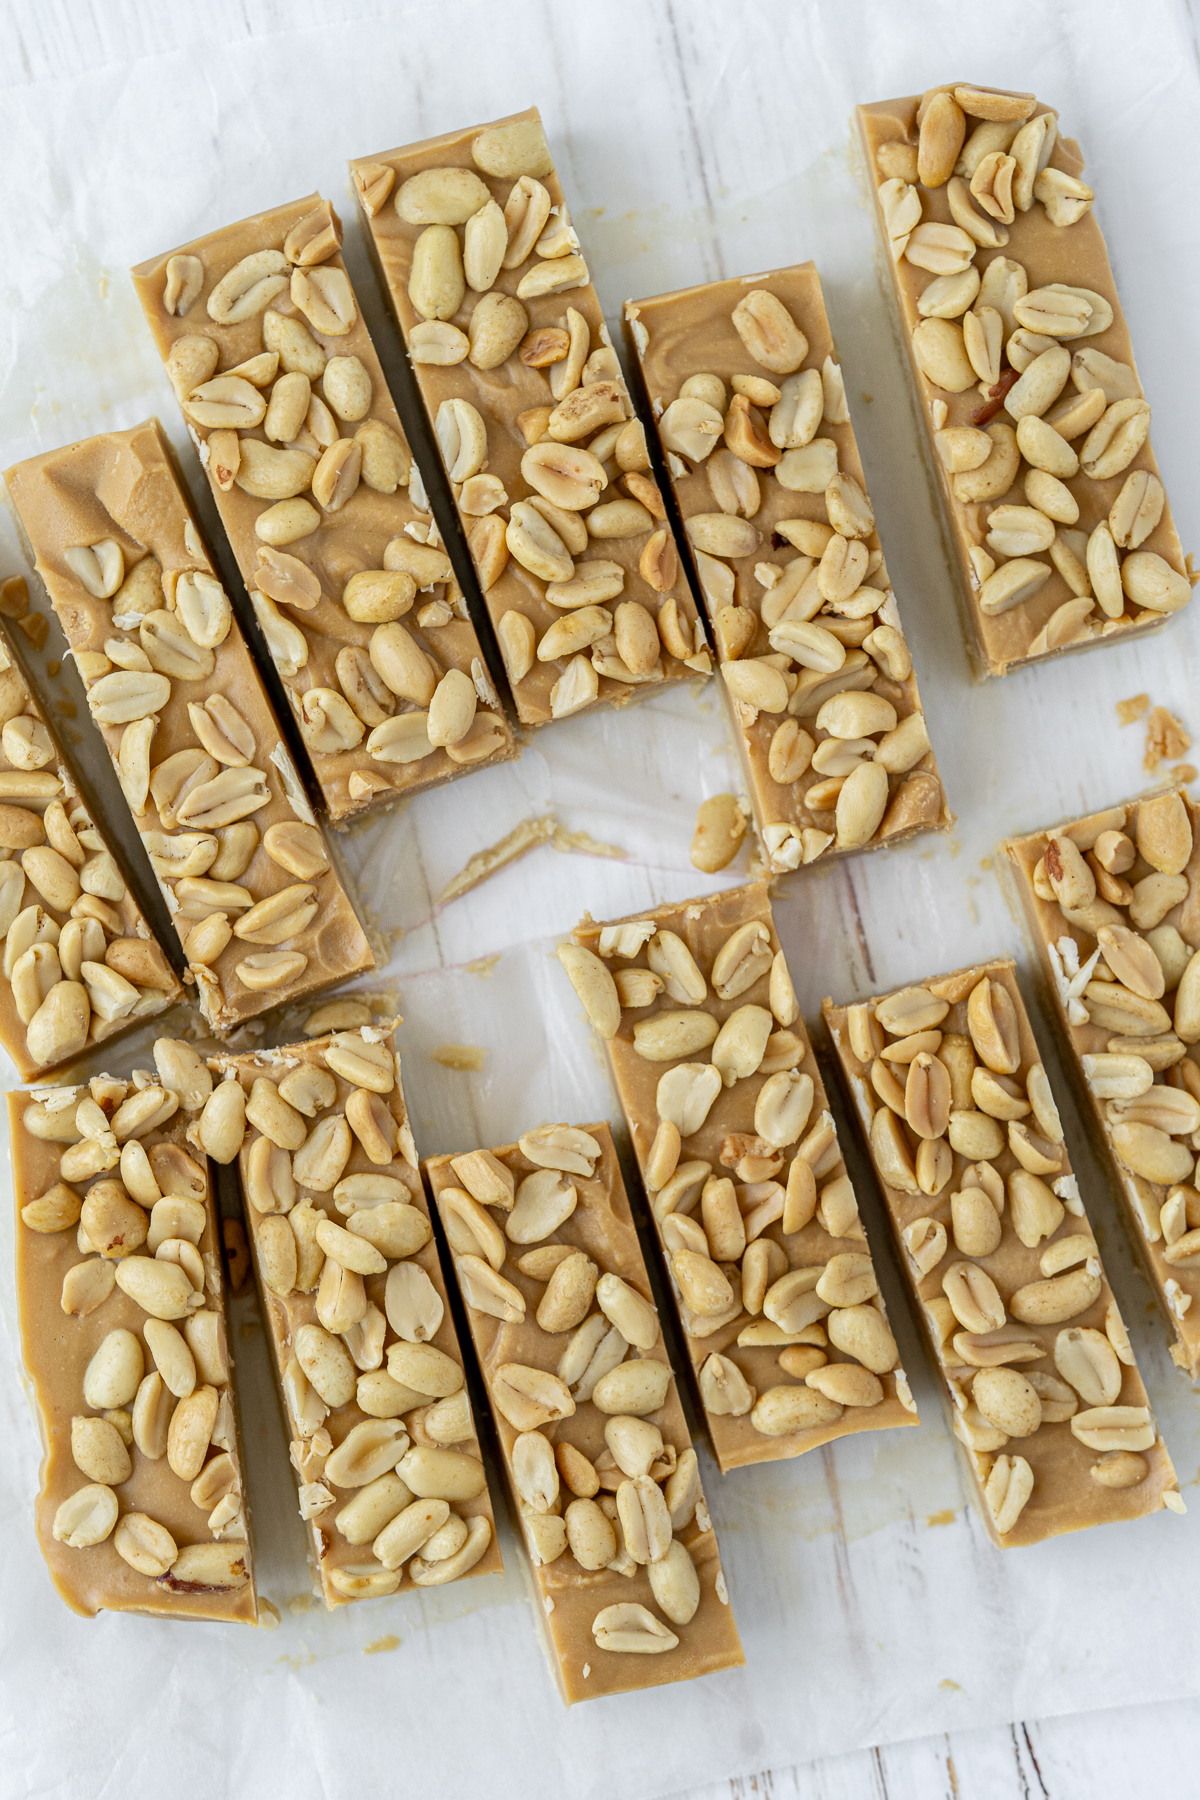 Overhead view of sliced bars with peanut butter and peanut layers without the chocolate drizzle.